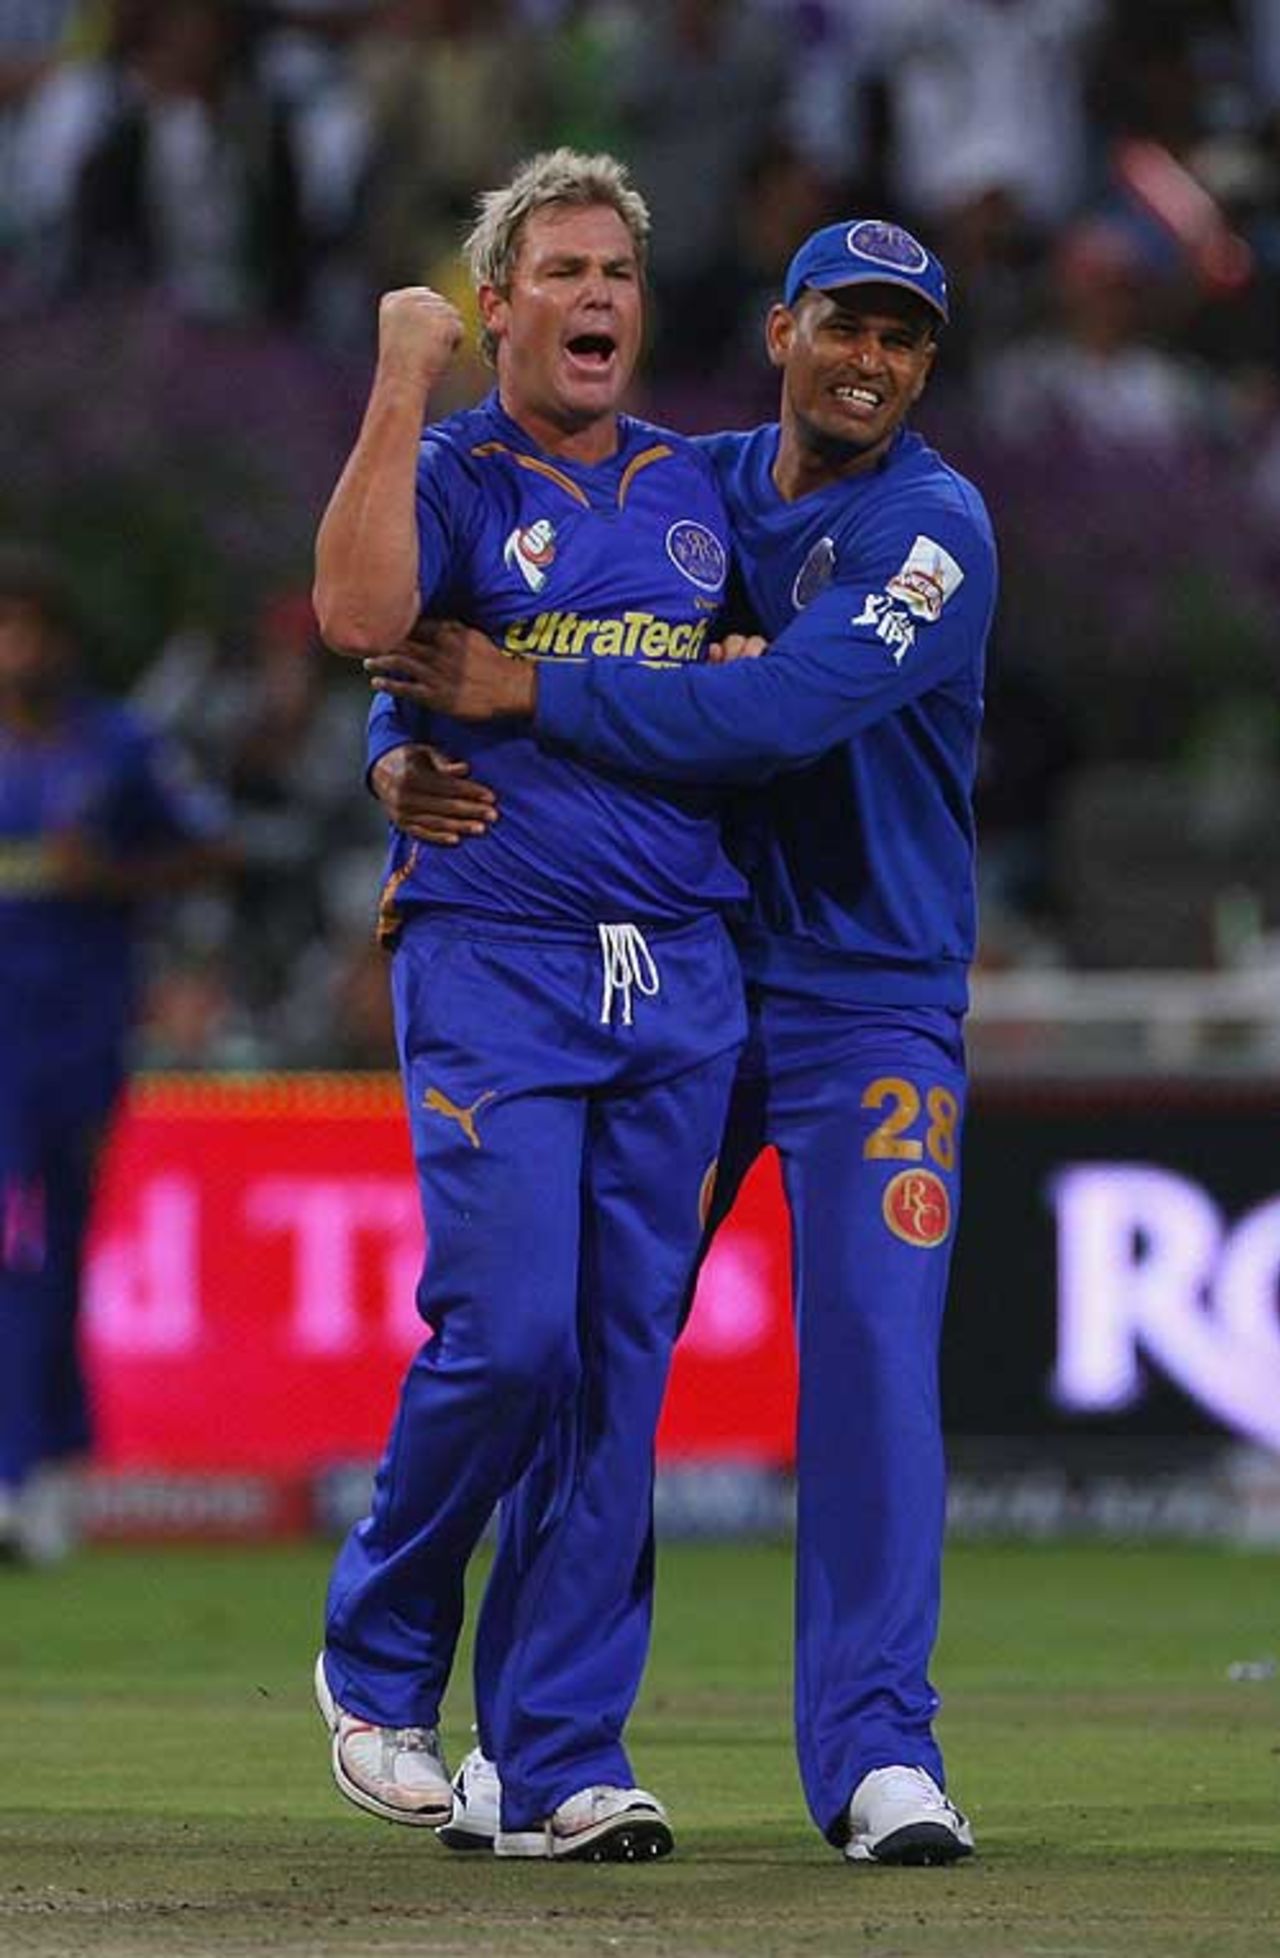 Shane Warne proved that he still had plenty in him, Bangalore Royal Challengers v Rajasthan Royals, IPL, 2nd game, Cape Town, April 18, 2009